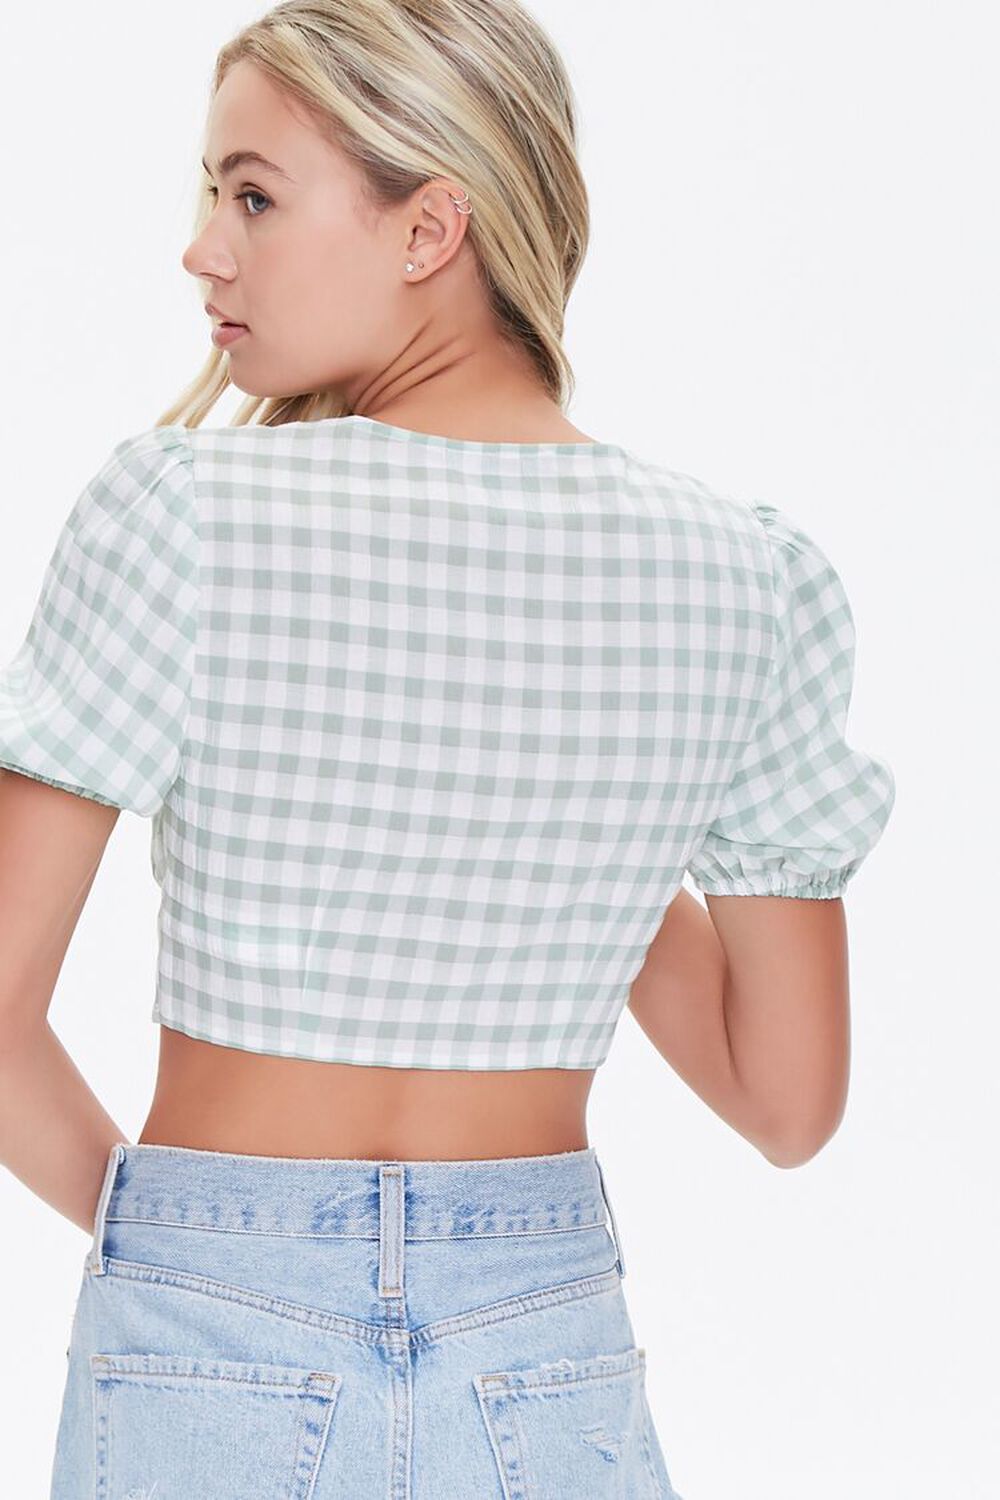 LIGHT GREEN/WHITE Gingham Tie-Front Crop Top, image 3